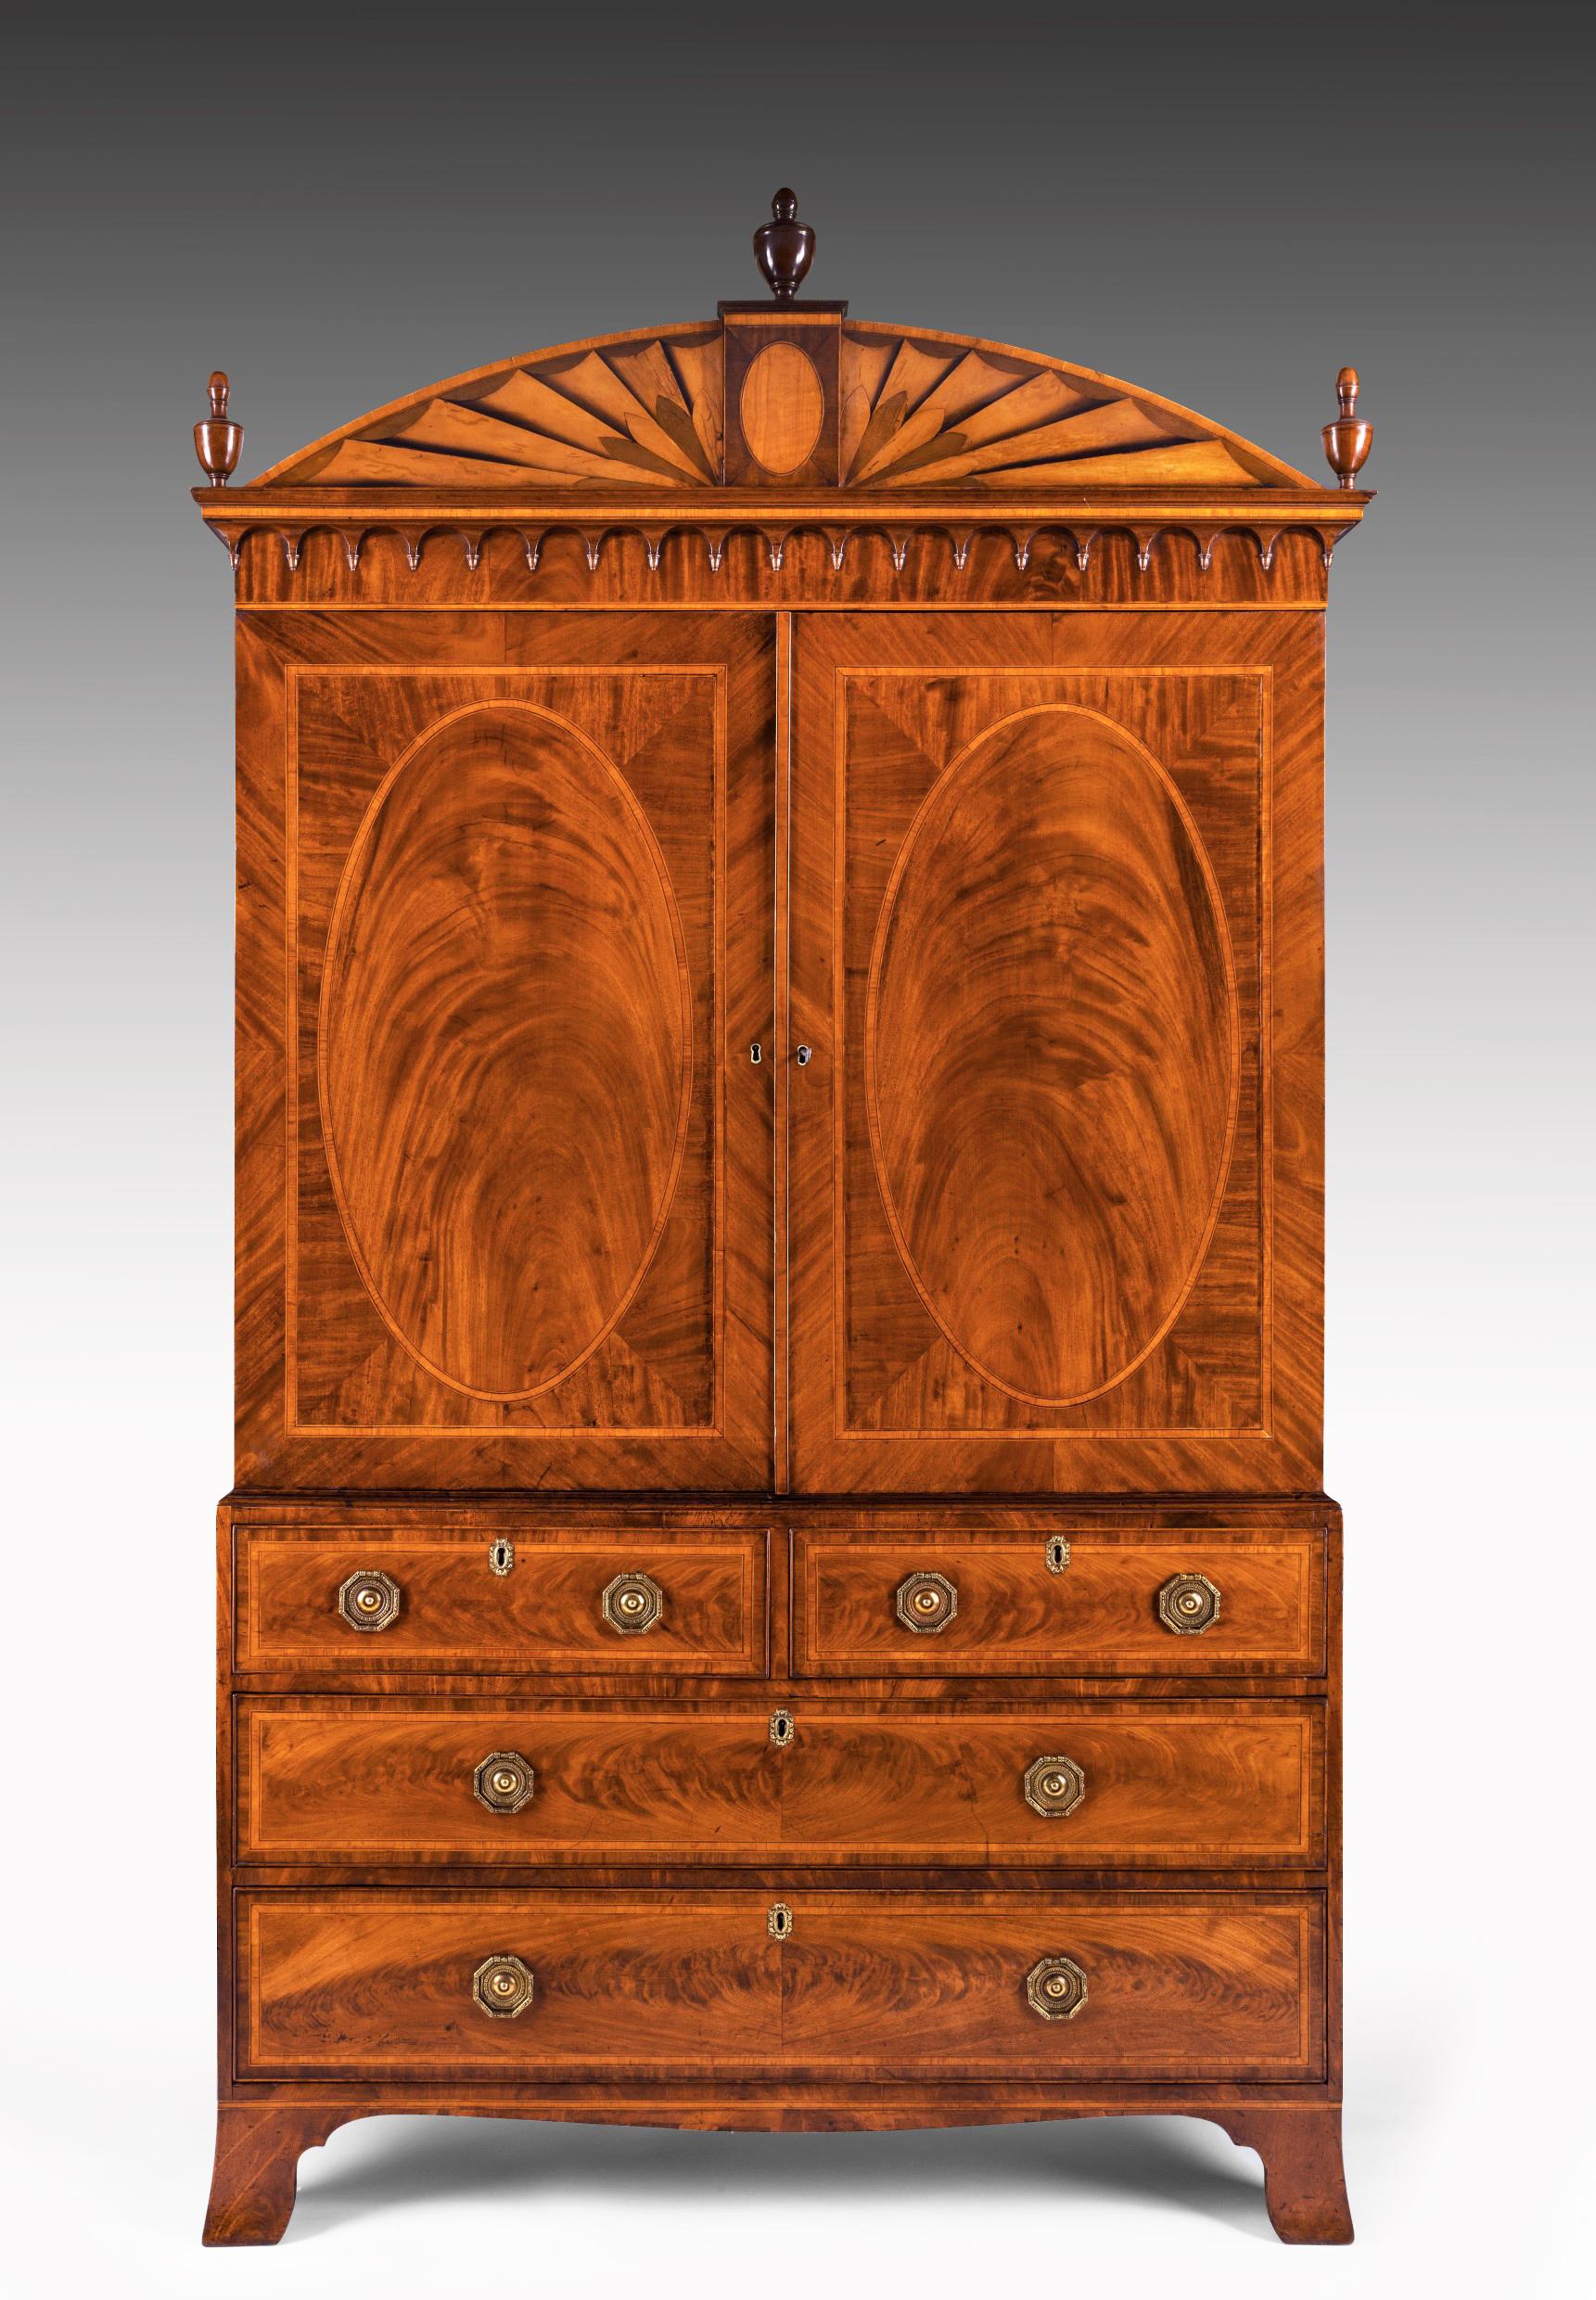 An extremely fine quality George III Sheraton period mahogany and satinwood inlaid linen press / mahogany clothes press of outstanding figuring and color, circa 1790.
The cornice having a central oval inlaid tablet with a satinwood fan inlaid